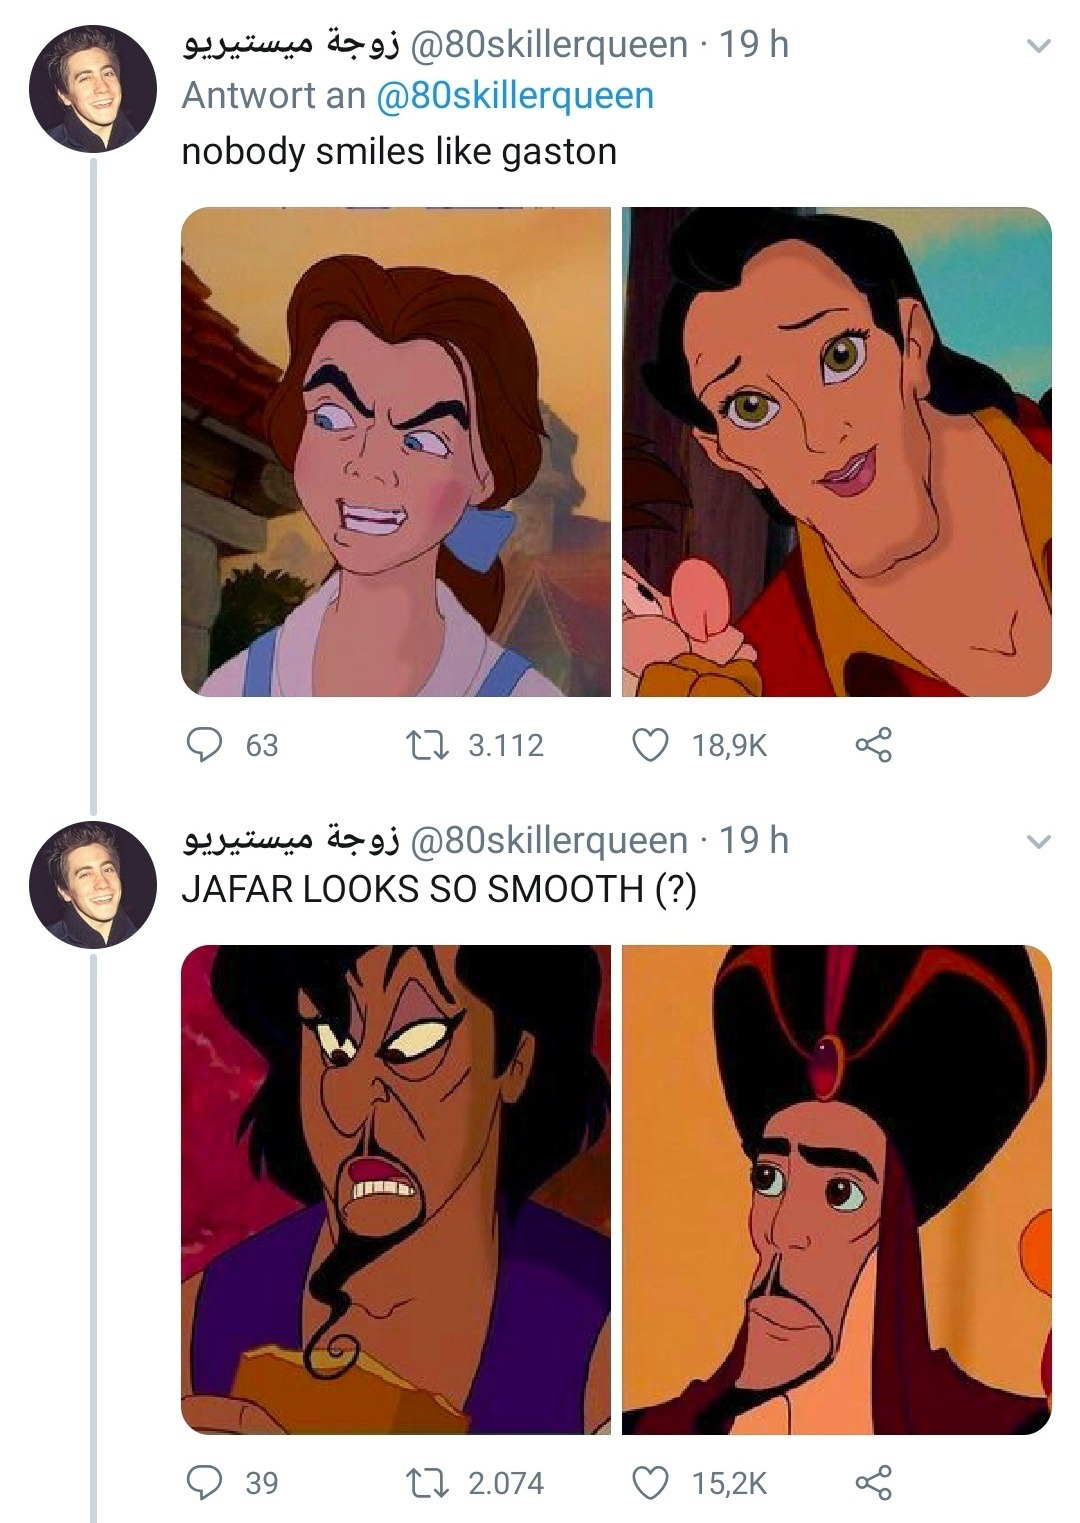 cursed images meme - is as ej 19 h Antwort an nobody smiles gaston 63 7 3.112 Siwa ds 9j . 19 h Jafar Looks So Smooth ? 39 12 2.074